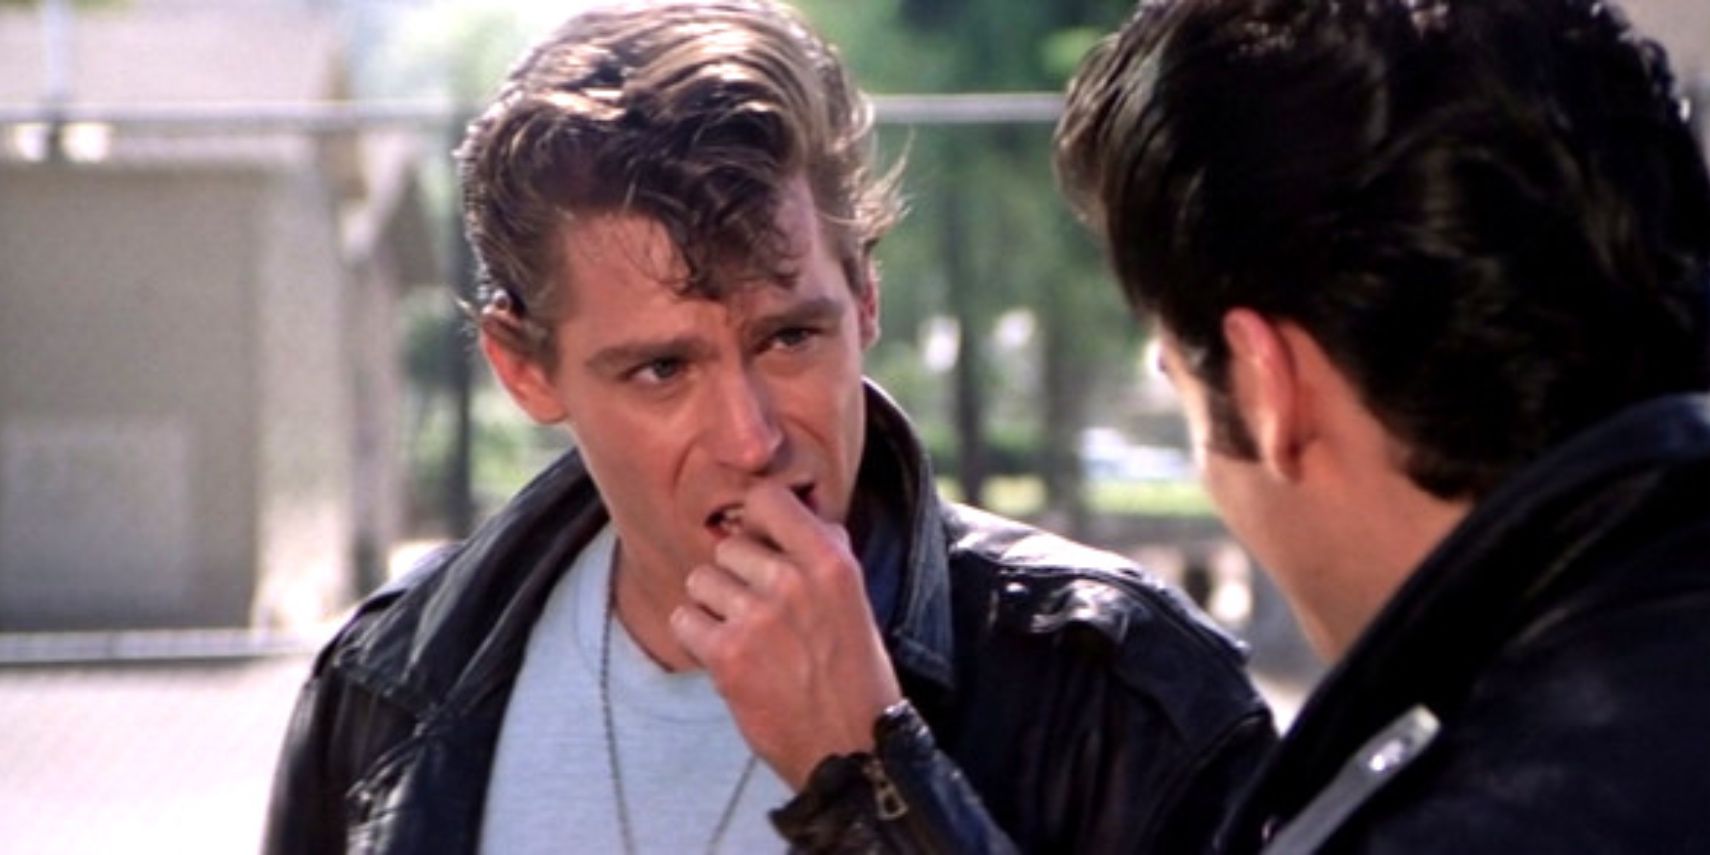 Kenickie talking to Danny in Grease